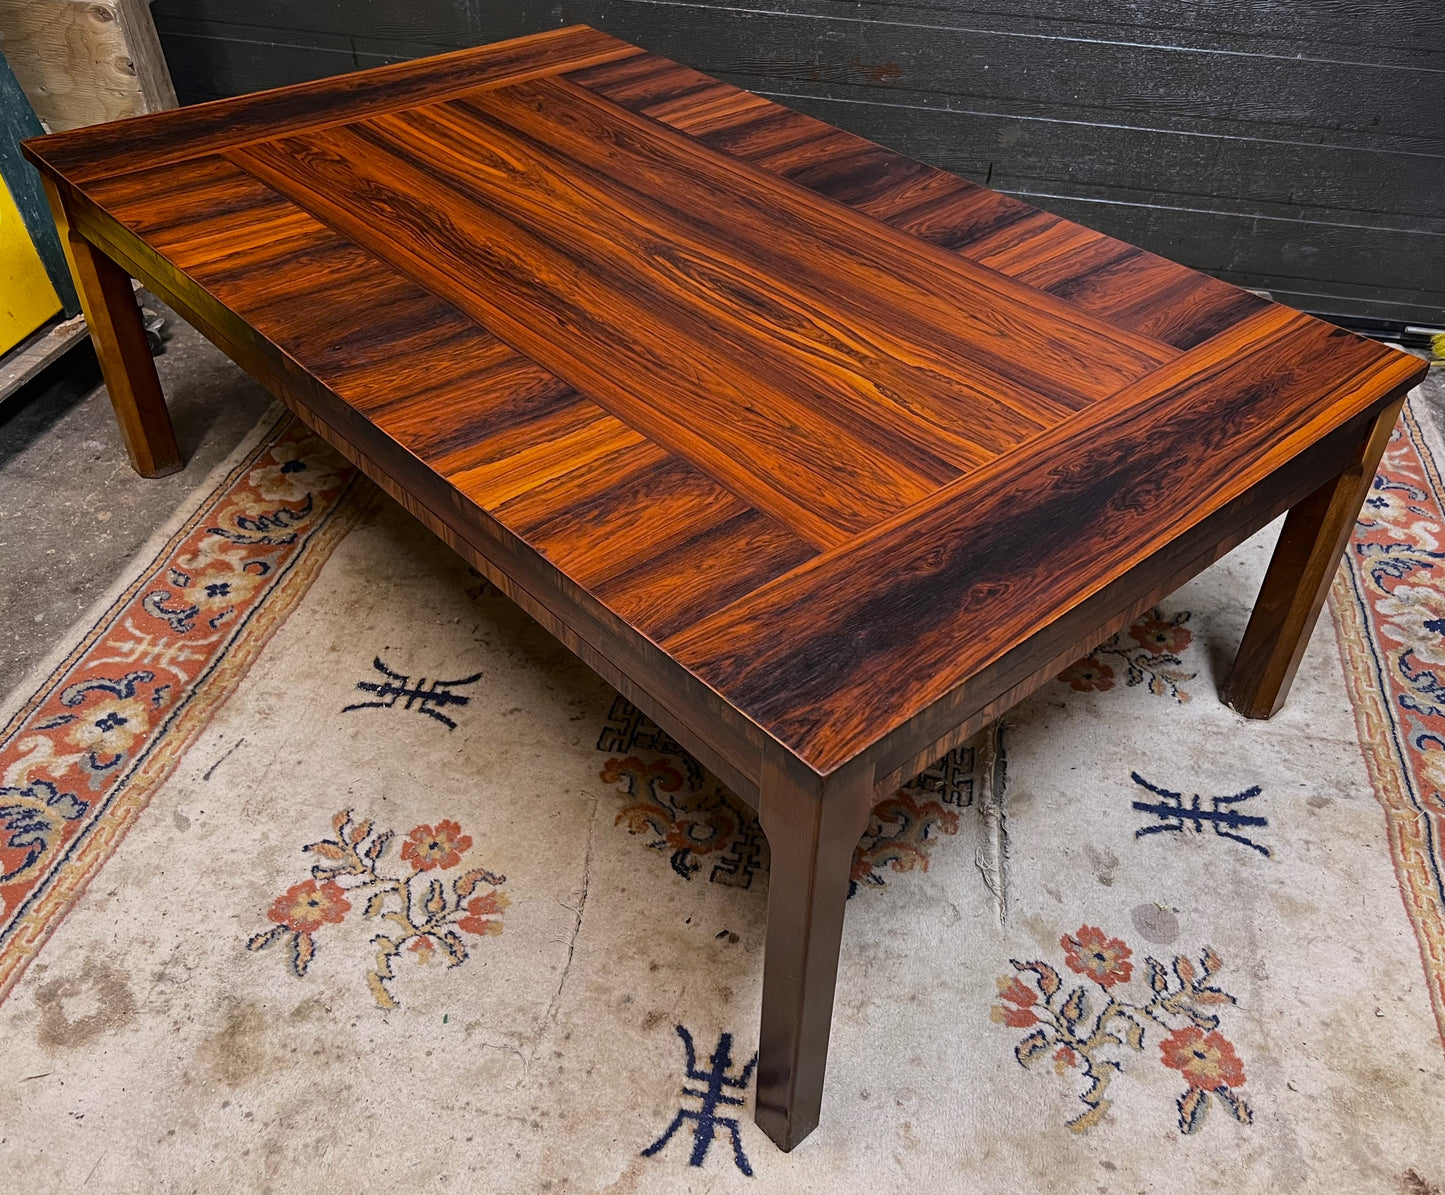 REFINISHED Danish Mid Century Modern Rosewood Coffee Table, Large